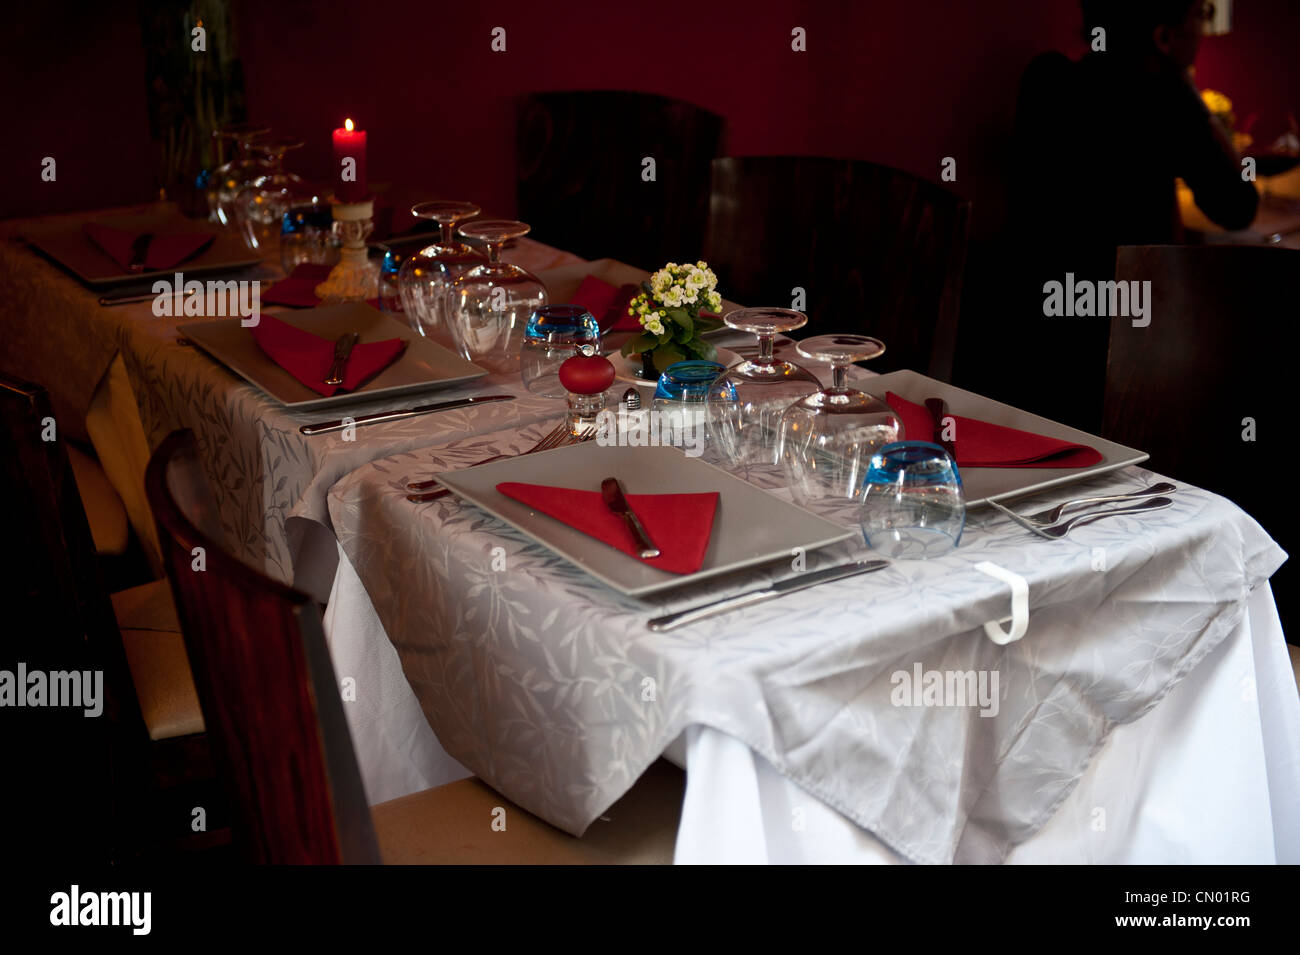 A table setup for a romantic couples dinner. Stock Photo